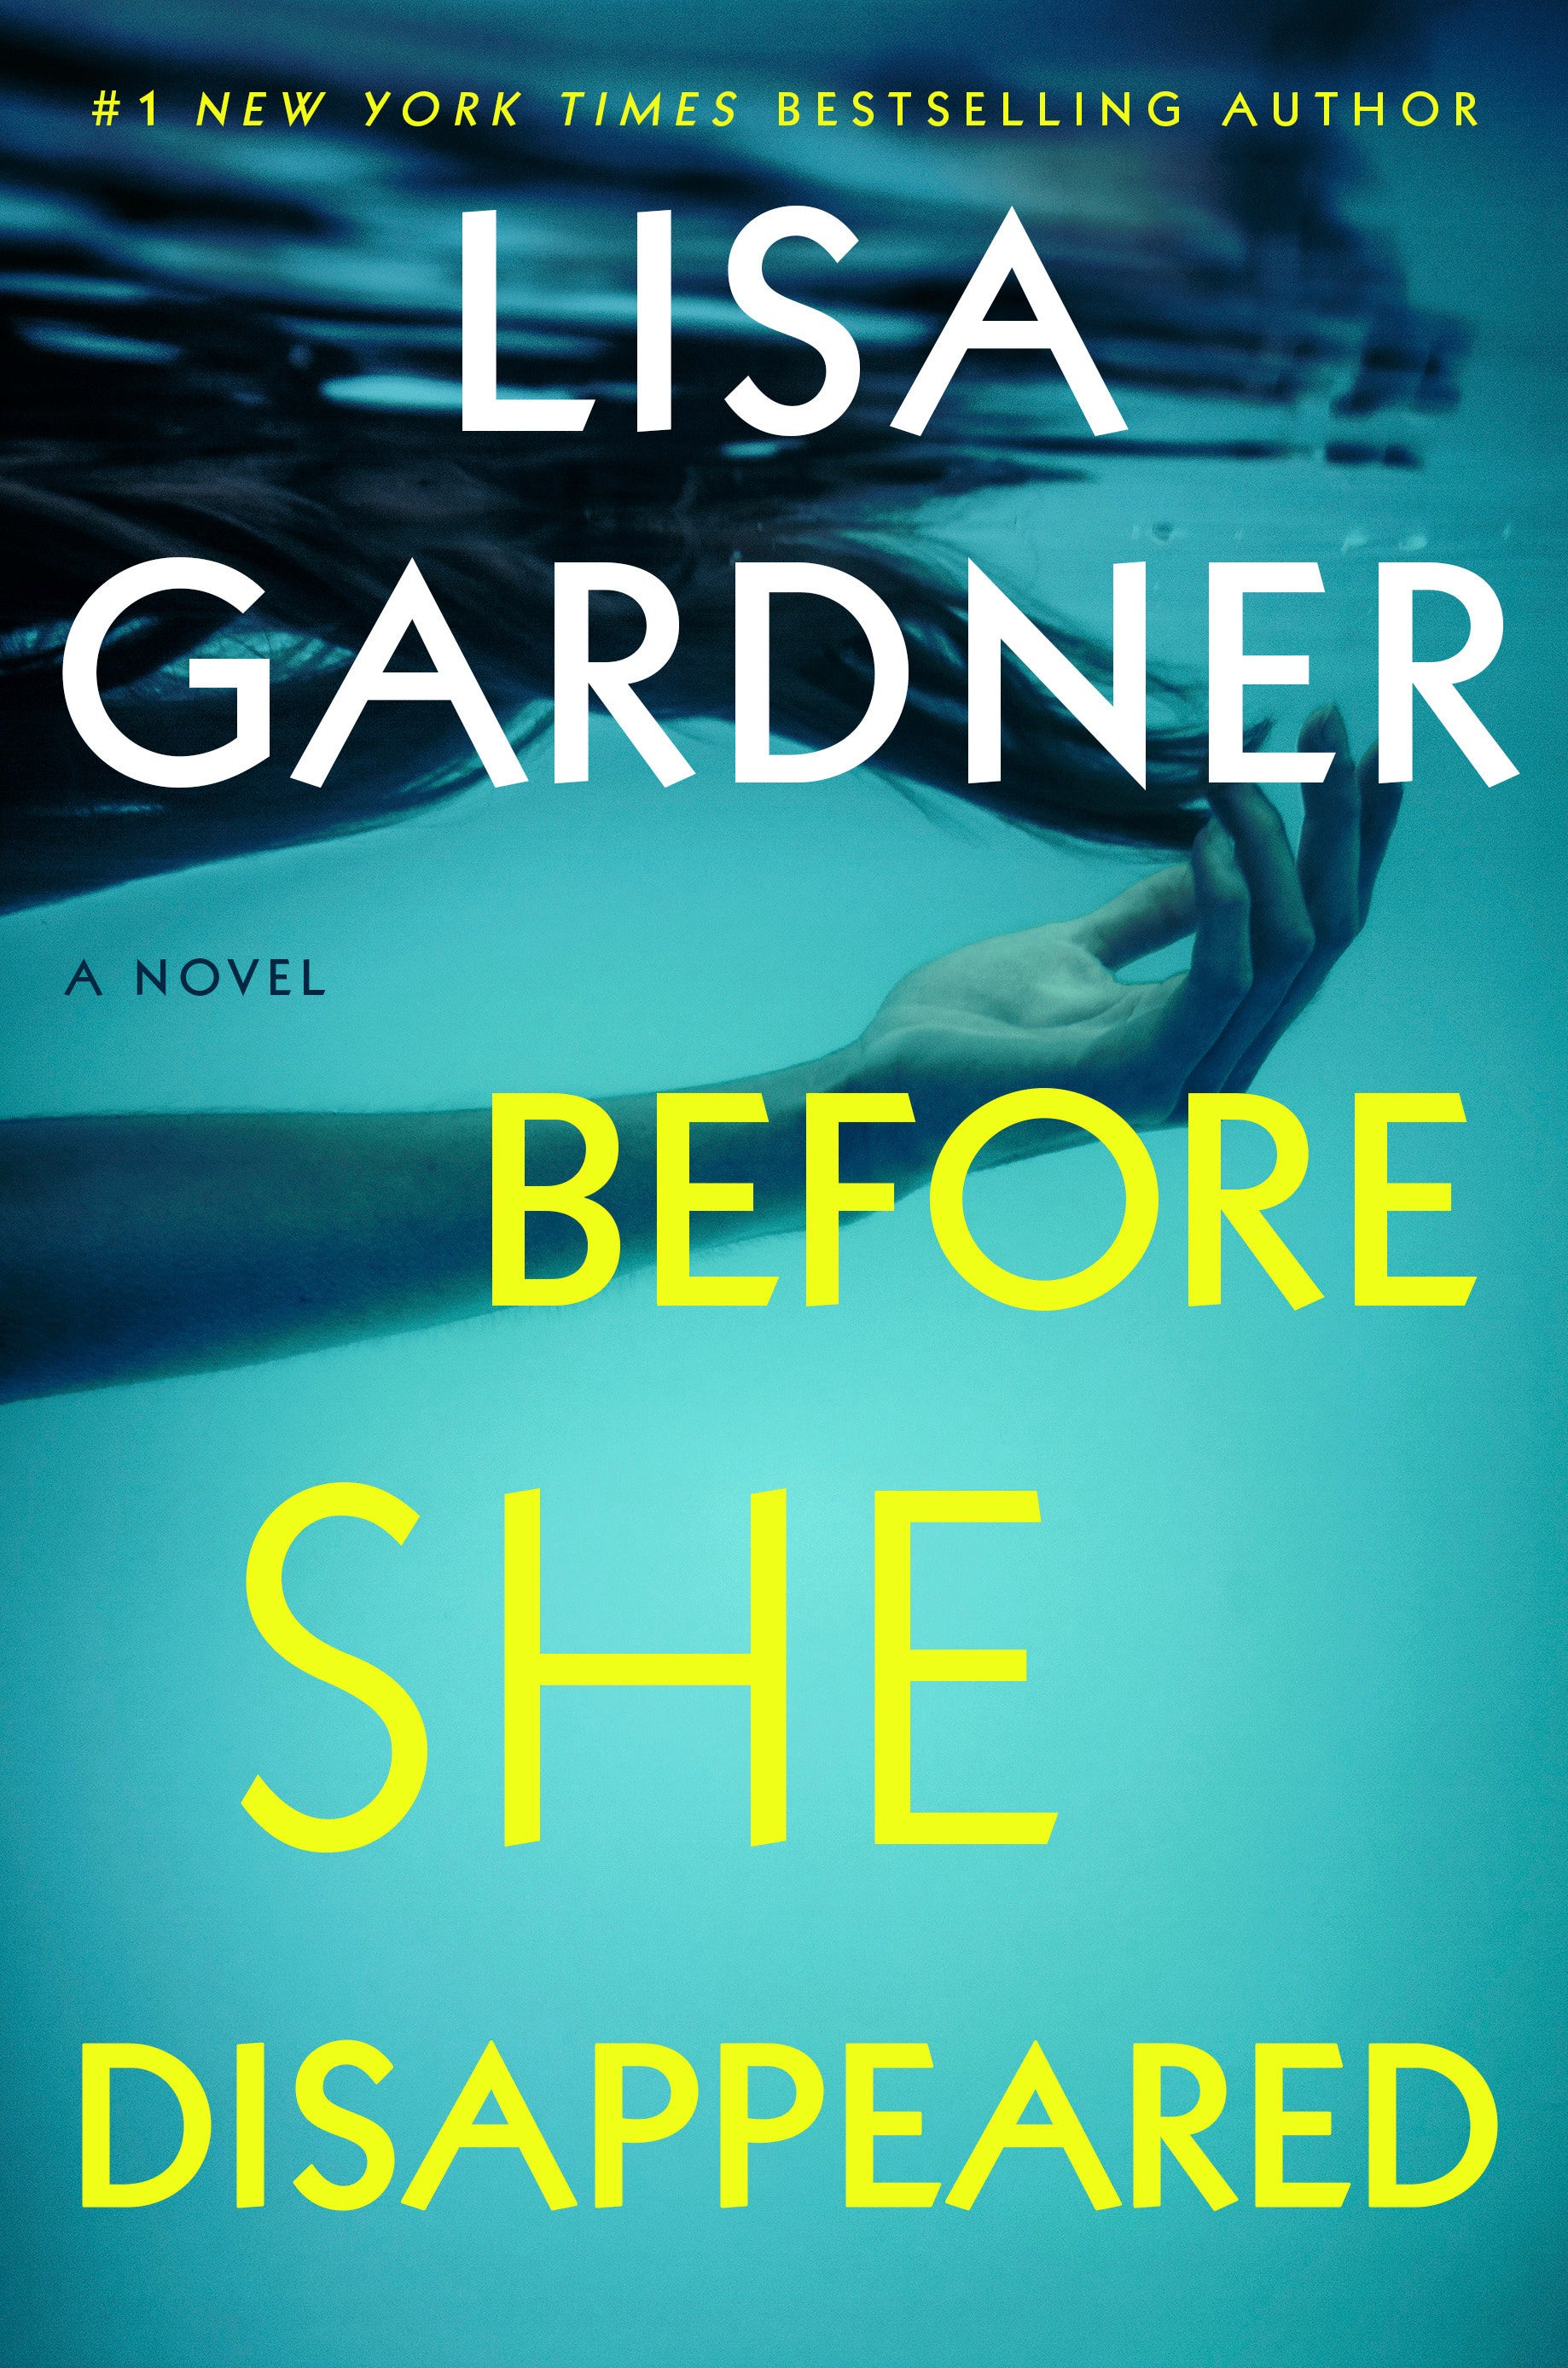 Book Review - Before She Disappeared